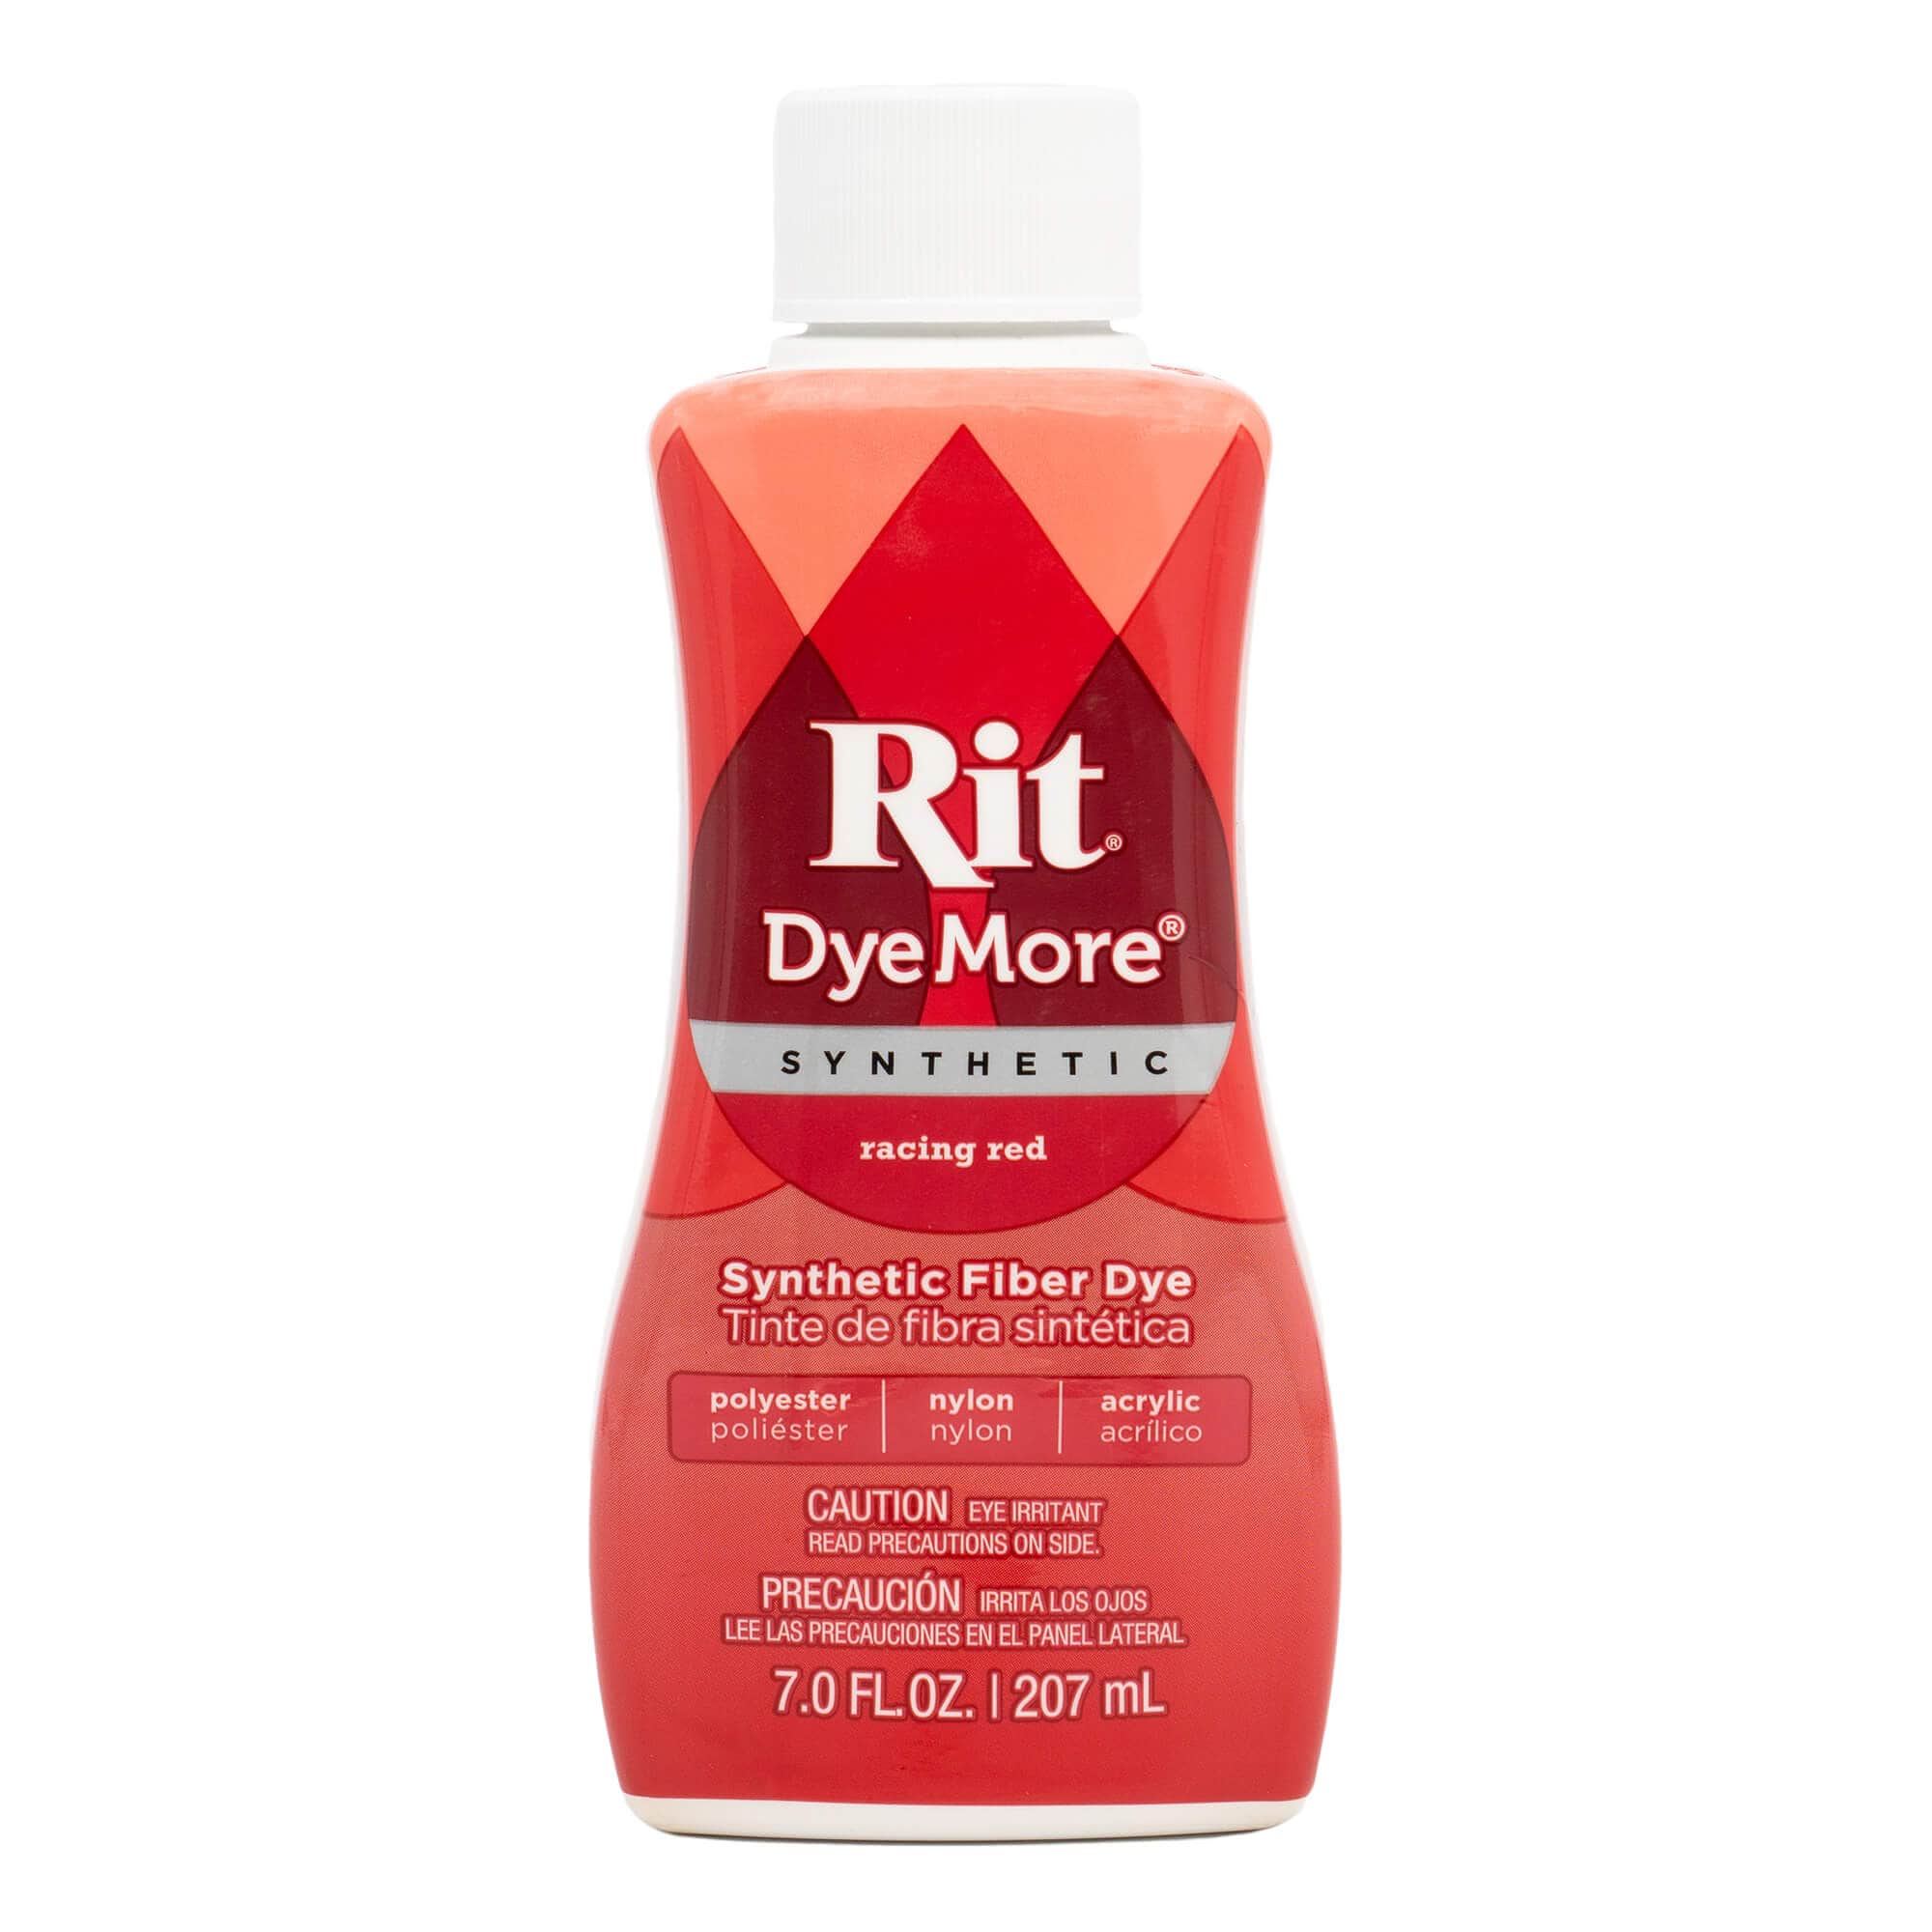 Synthetic Rit Dye More Liquid Fabric Dye - Ultimate Synthetic Rit Dye Accessories Kit - Wide Selection of Colors - 7 Ounces - Racing Red